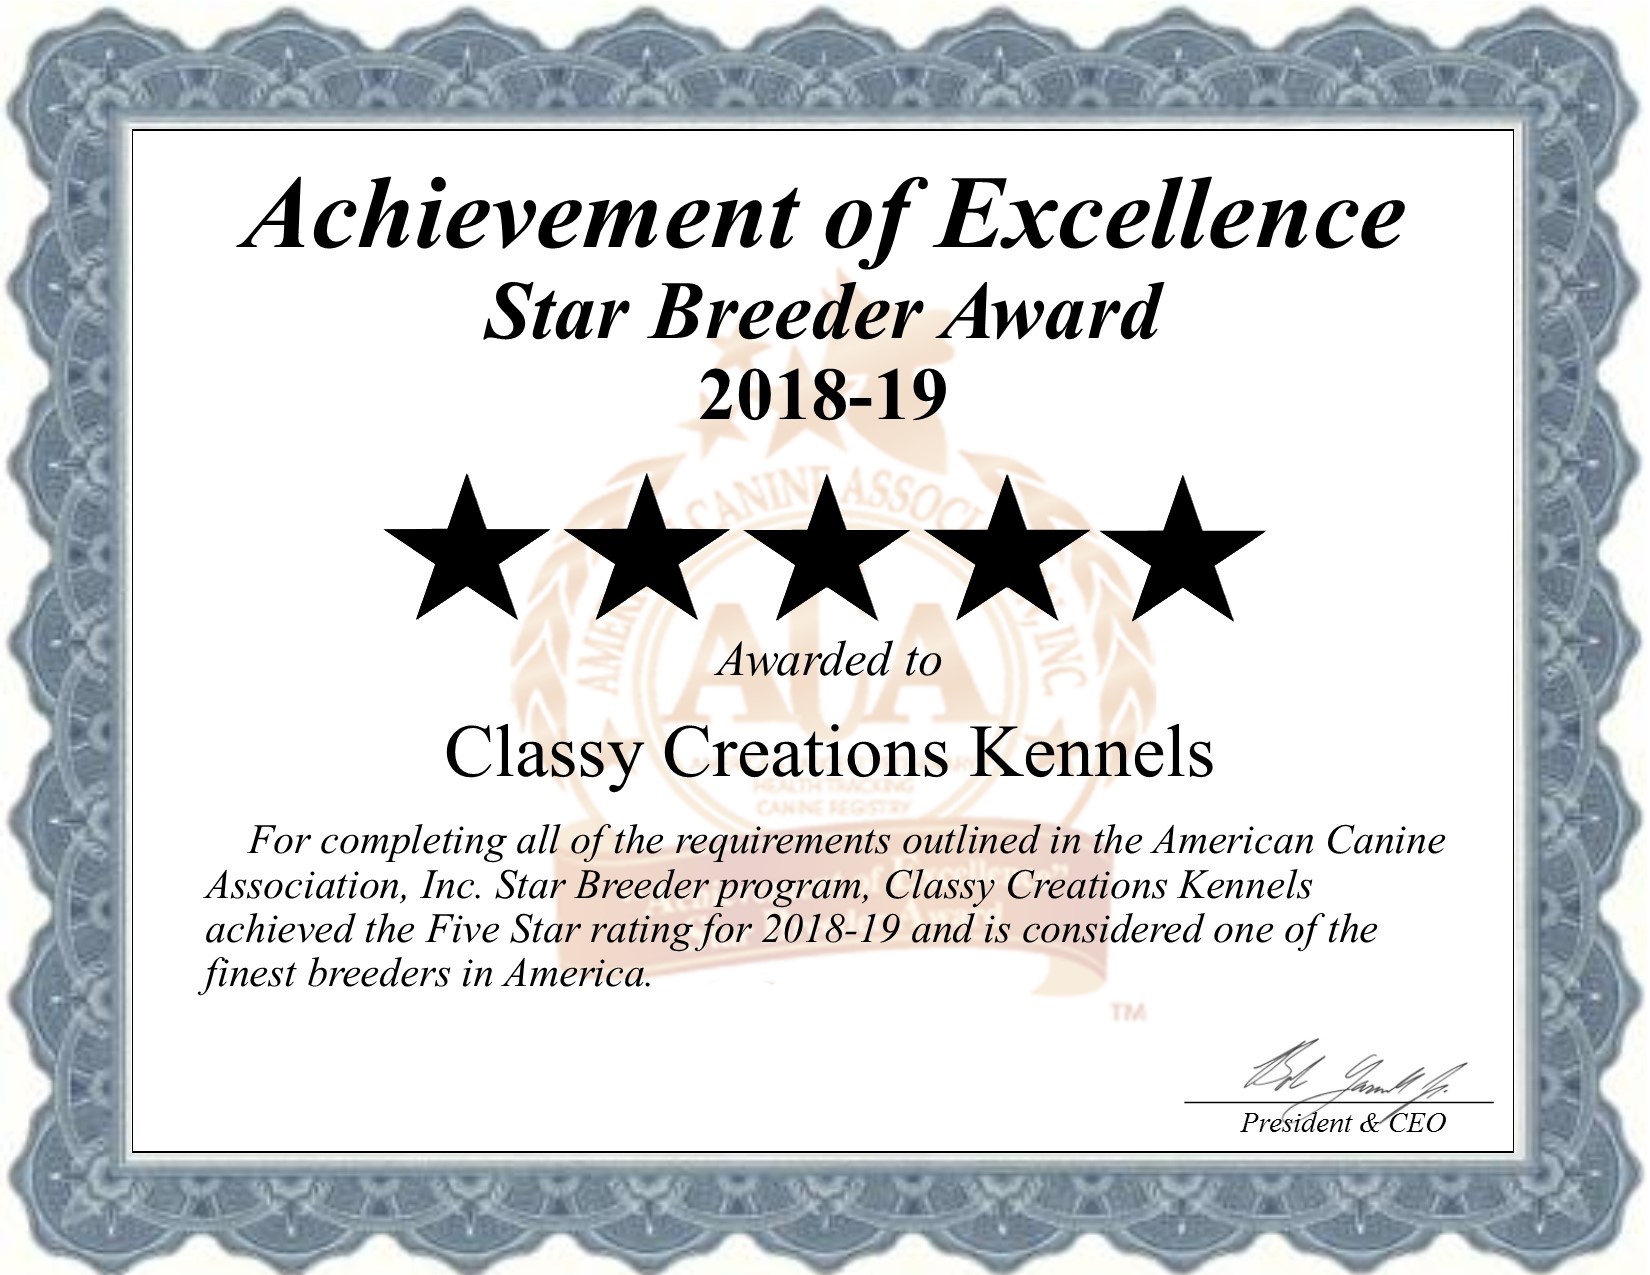 classy, creations, certificate, kennel, dog, breeder, classy-creations, kennels, lyons, dog-breeder, ny, new, york, puppies, breeders, kennels, usda, 21-a-0160, 21a0160, inspection, reports, inspections, puppy, mill, puppymill